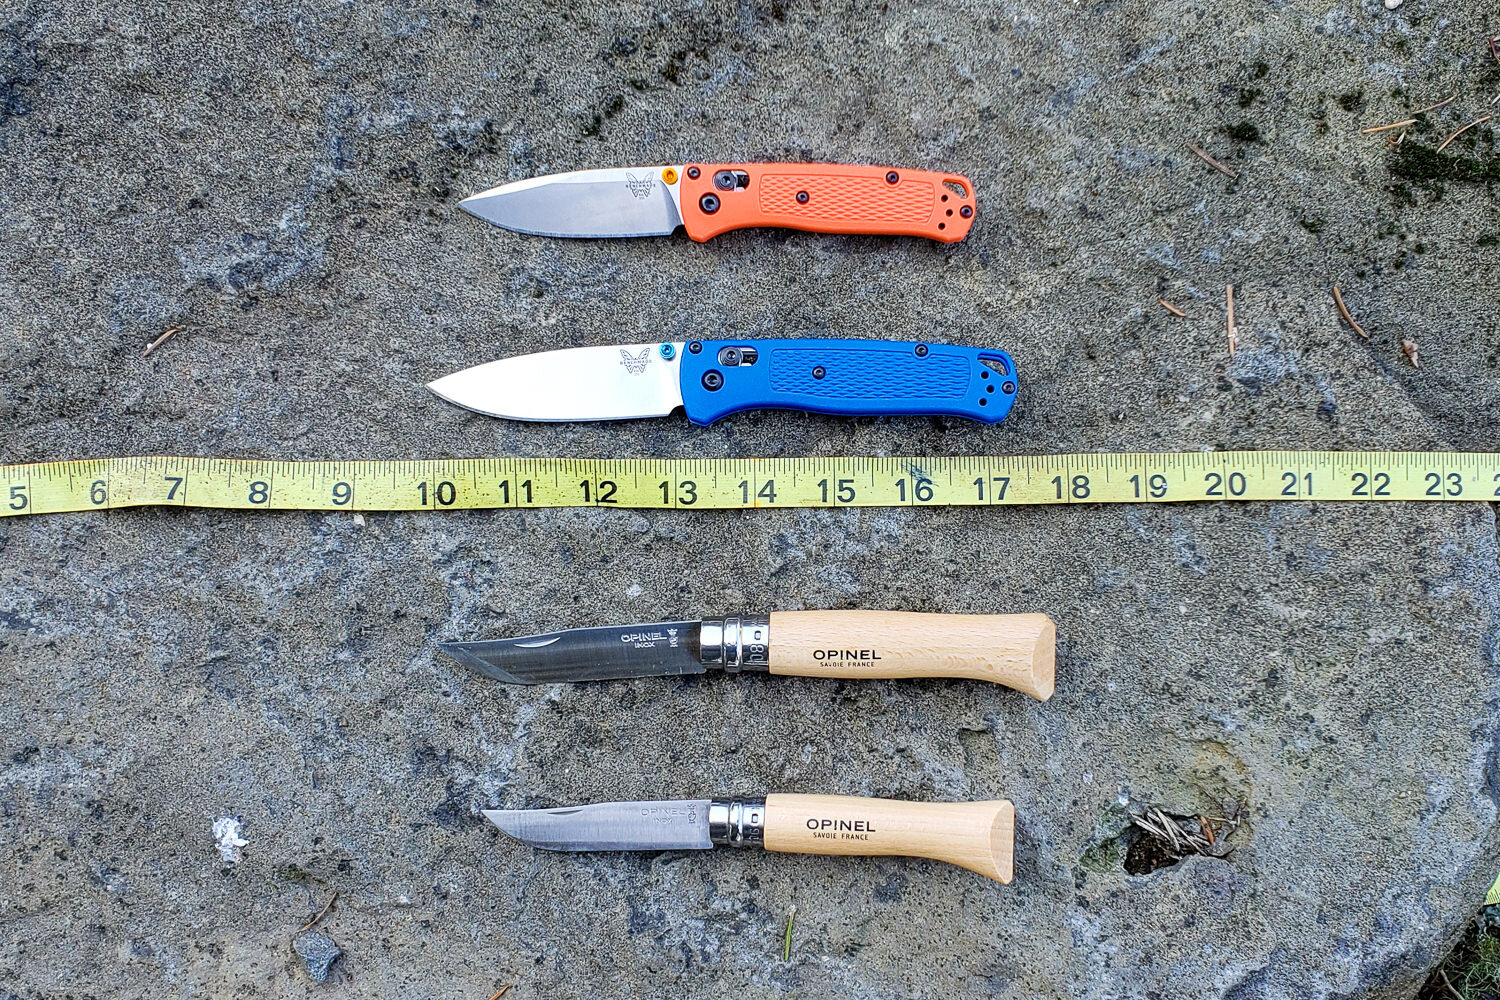 https://www.cleverhiker.com/wp-content/uploads/2023/08/Top-down-view-of-full-size-pocket-knives-next-to-their-mini-counterparts-with-a-ruler.jpeg